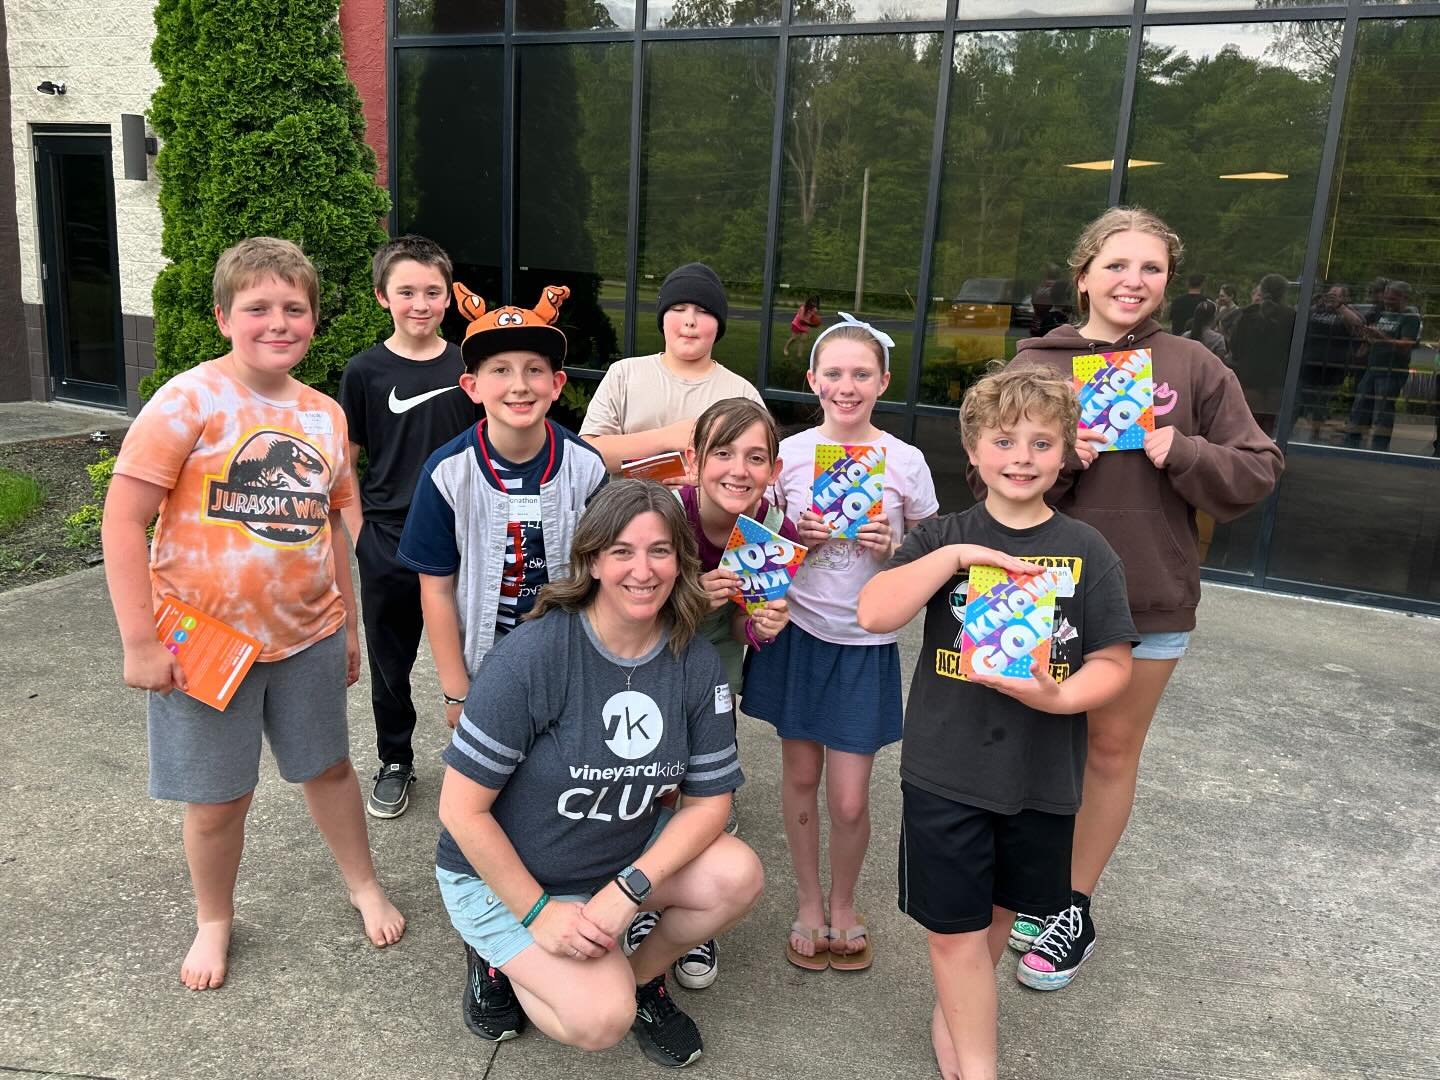 What a great end to another year of Kids Club! Youth joined us to play some 9 square and kickball! Thanks to all the parents who hung out and shared their wonderful food for our cookout and played too! We prayed over our 5th graders as they move up i